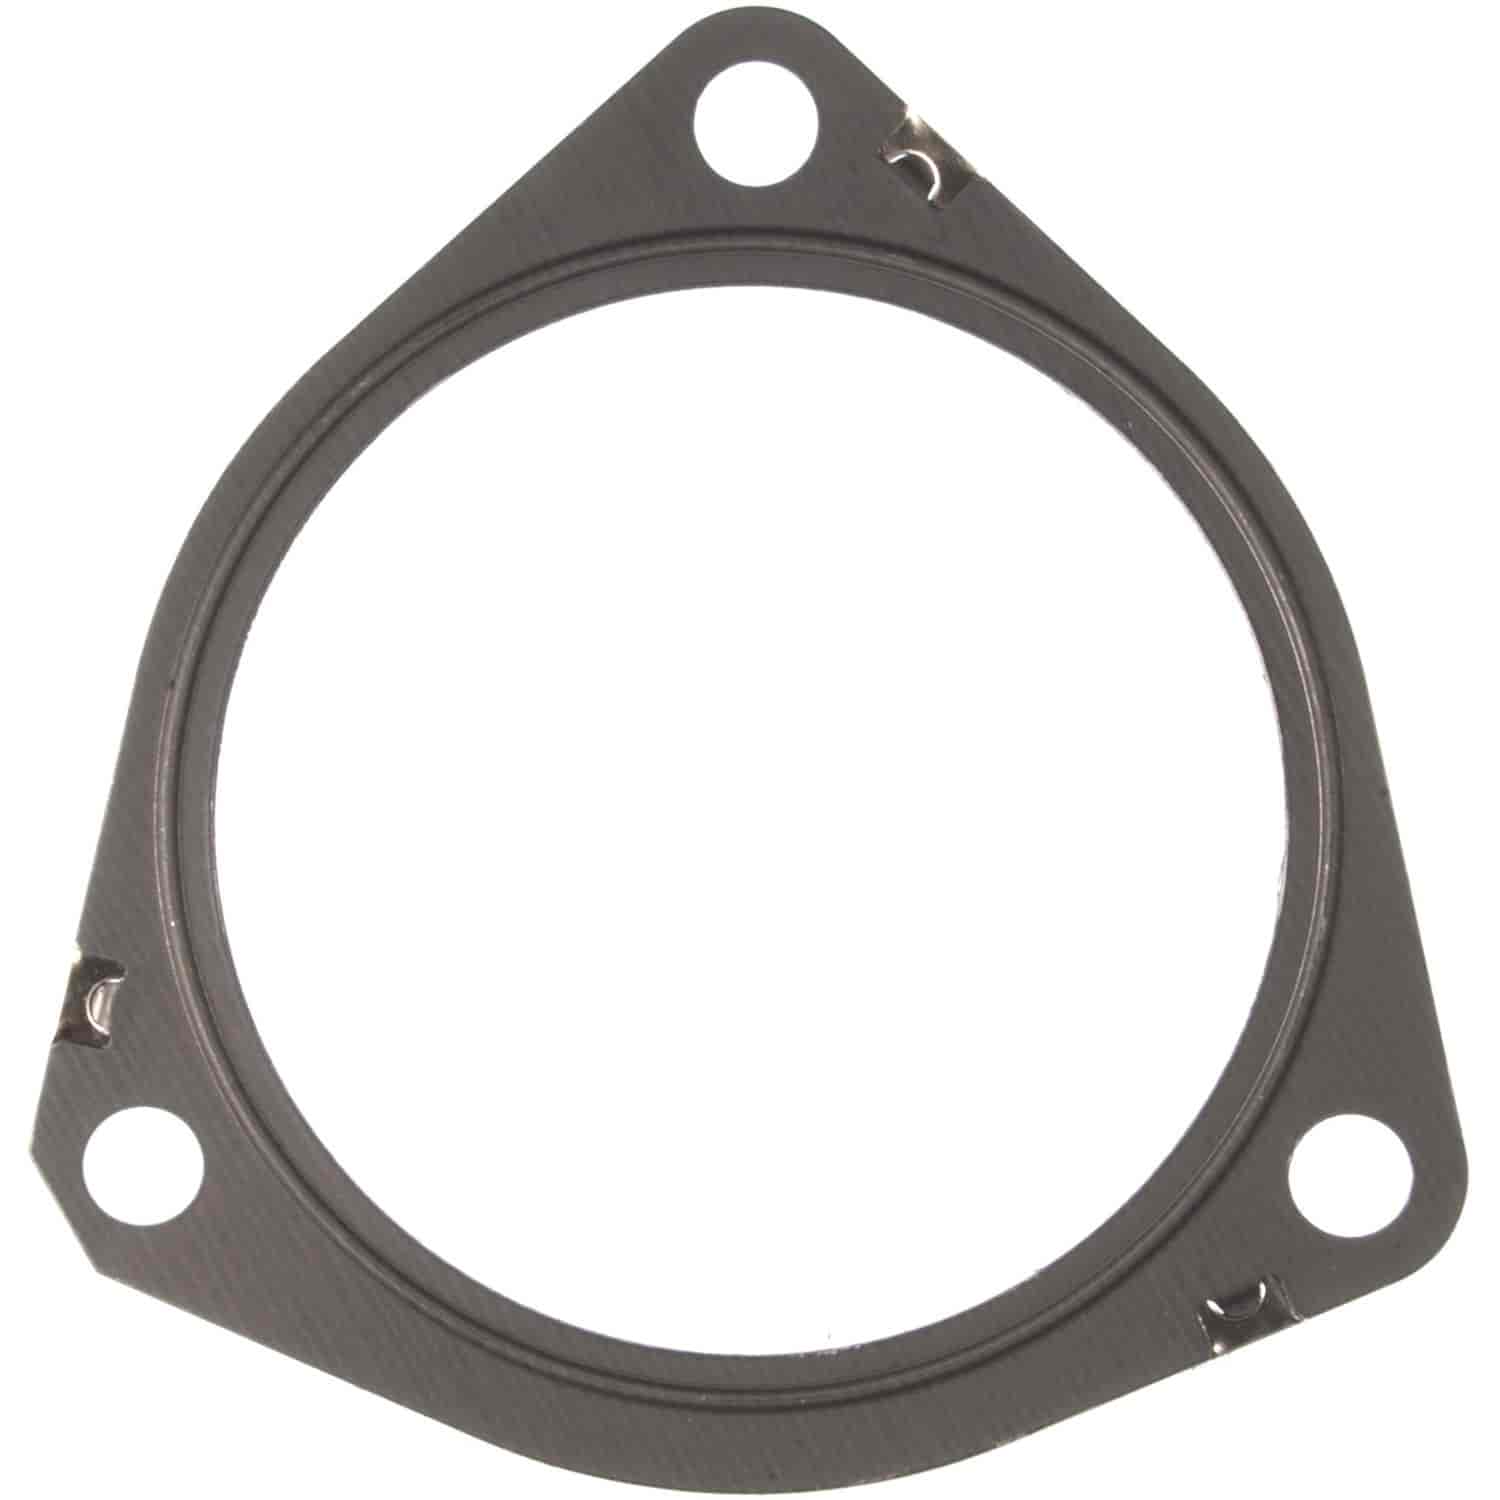 Exhaust Pipe Flange Gasket AUDI PIPE TO MANIFOLD GASKET 3.0L 4.2L